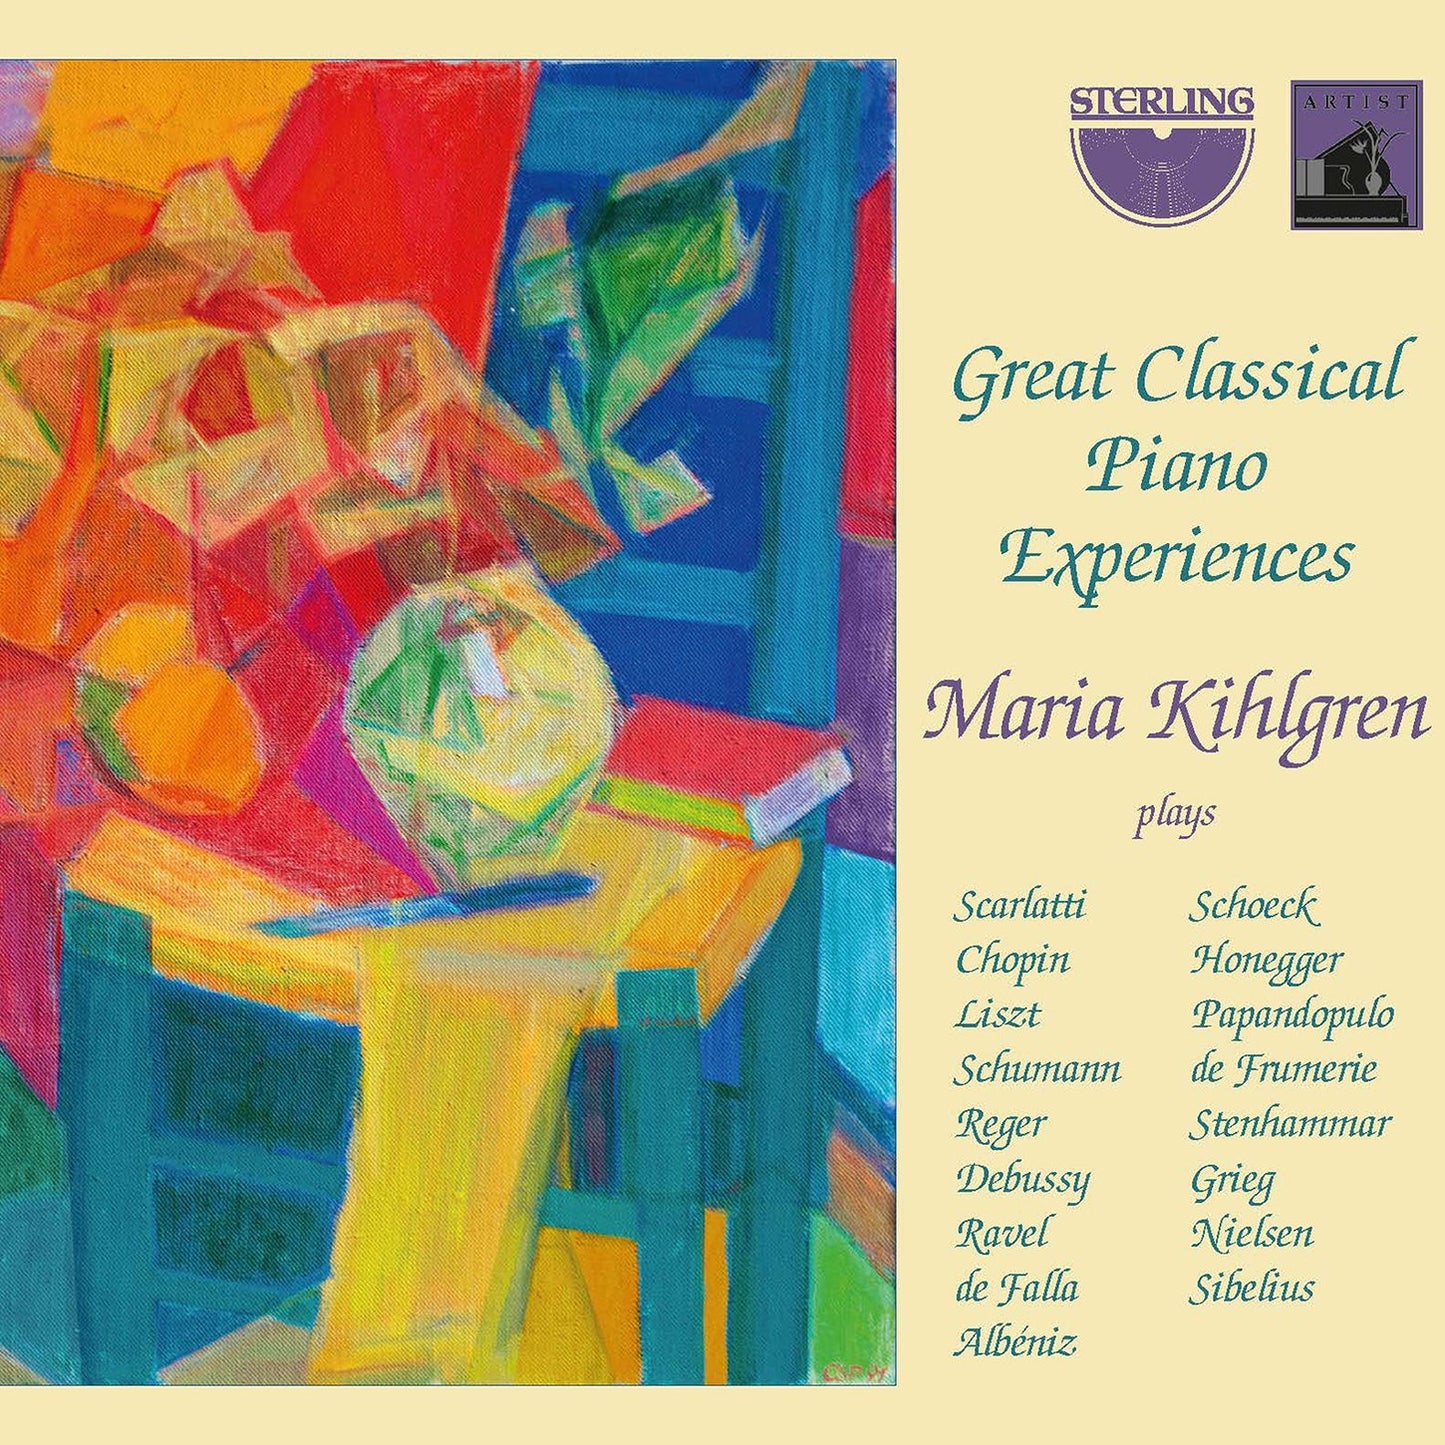 Great Classical Piano